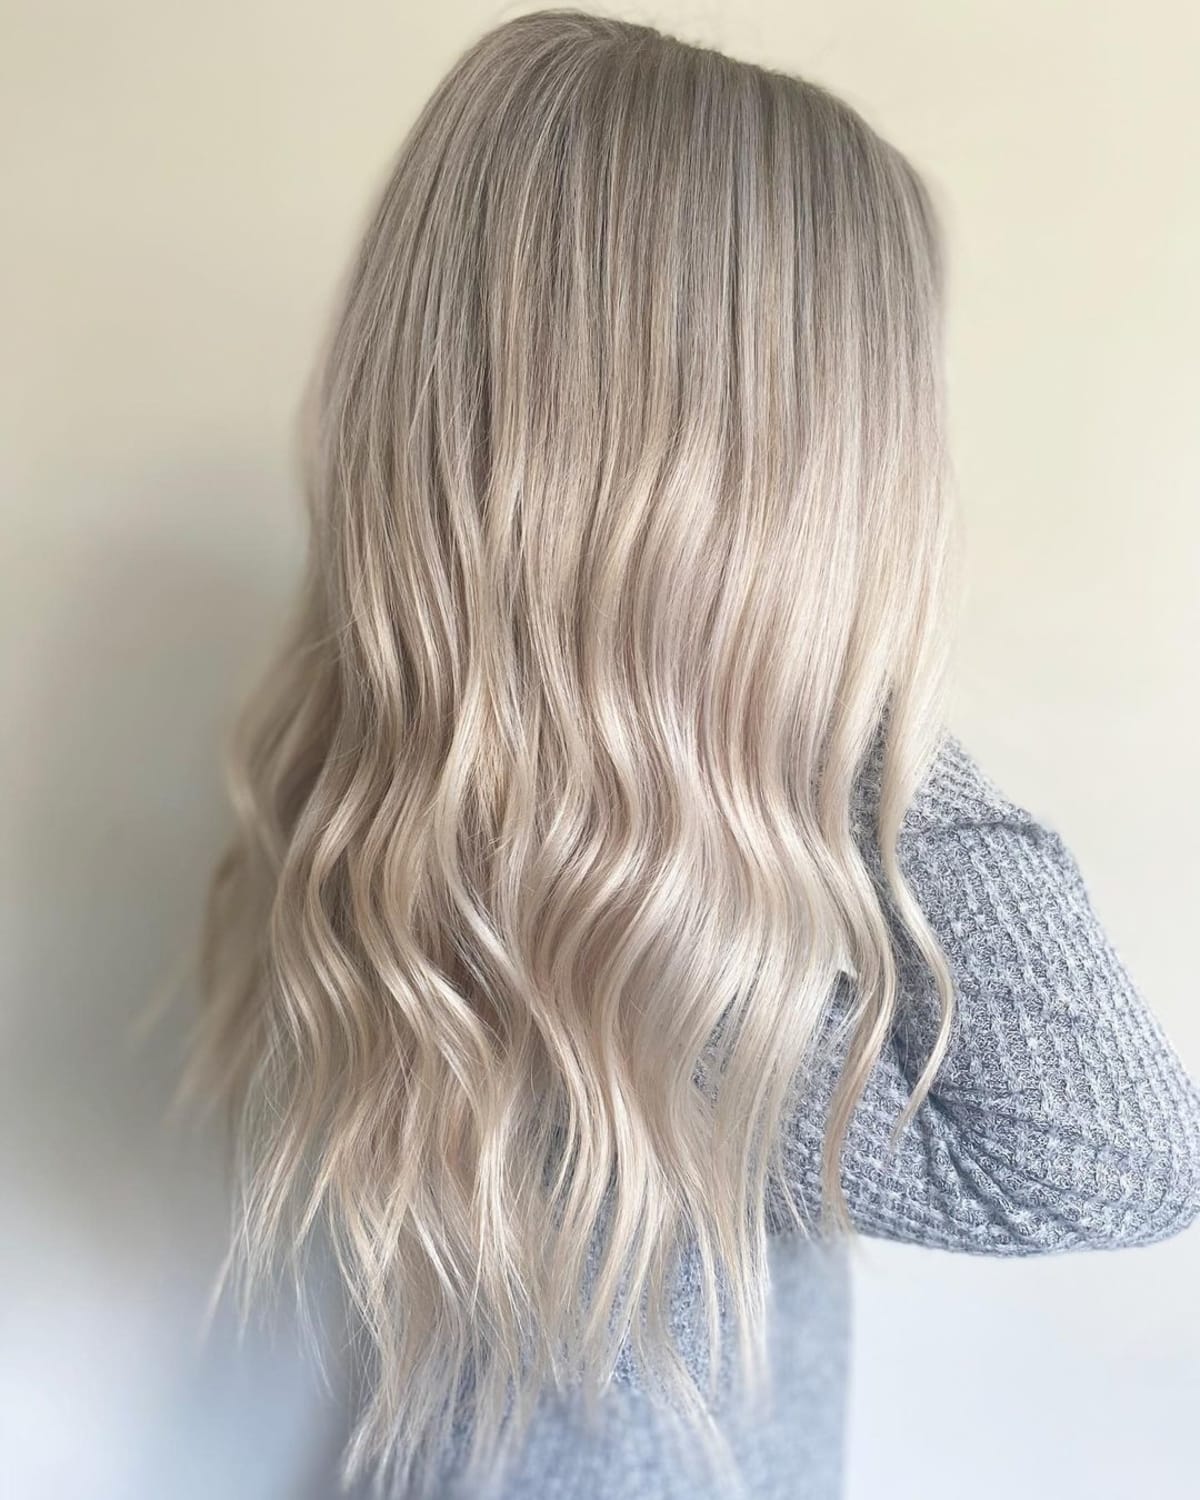 19 Best Champagne Blonde Hair Color Ideas for Every Skin Tone